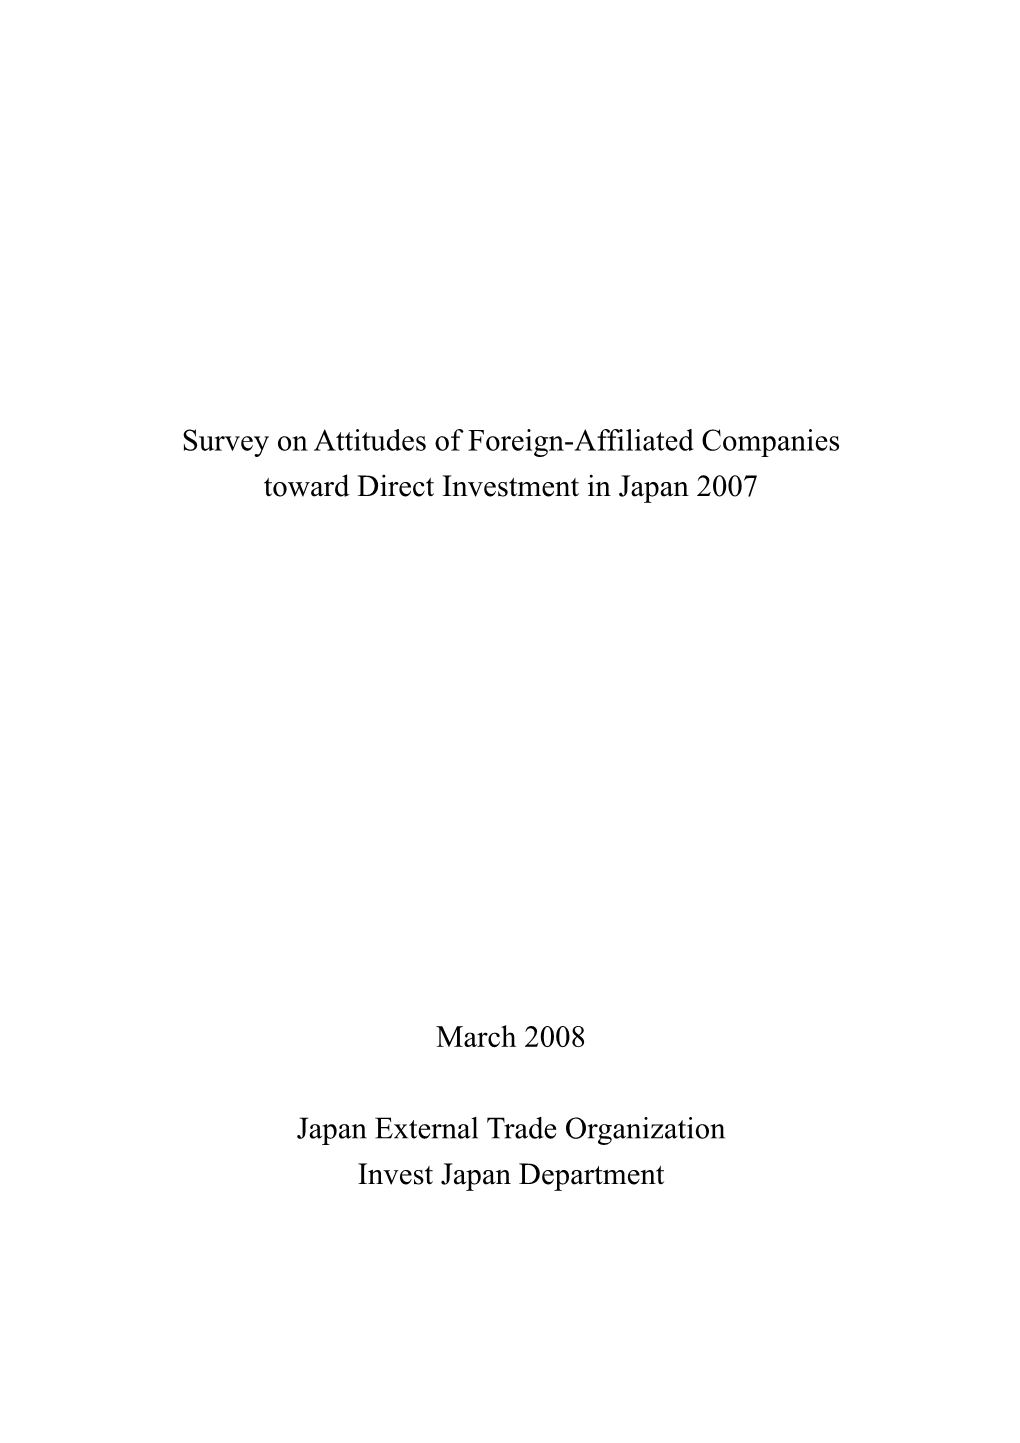 Survey on Attitudes of Foreign-Affiliated Companies Toward Direct Investment in Japan 2007